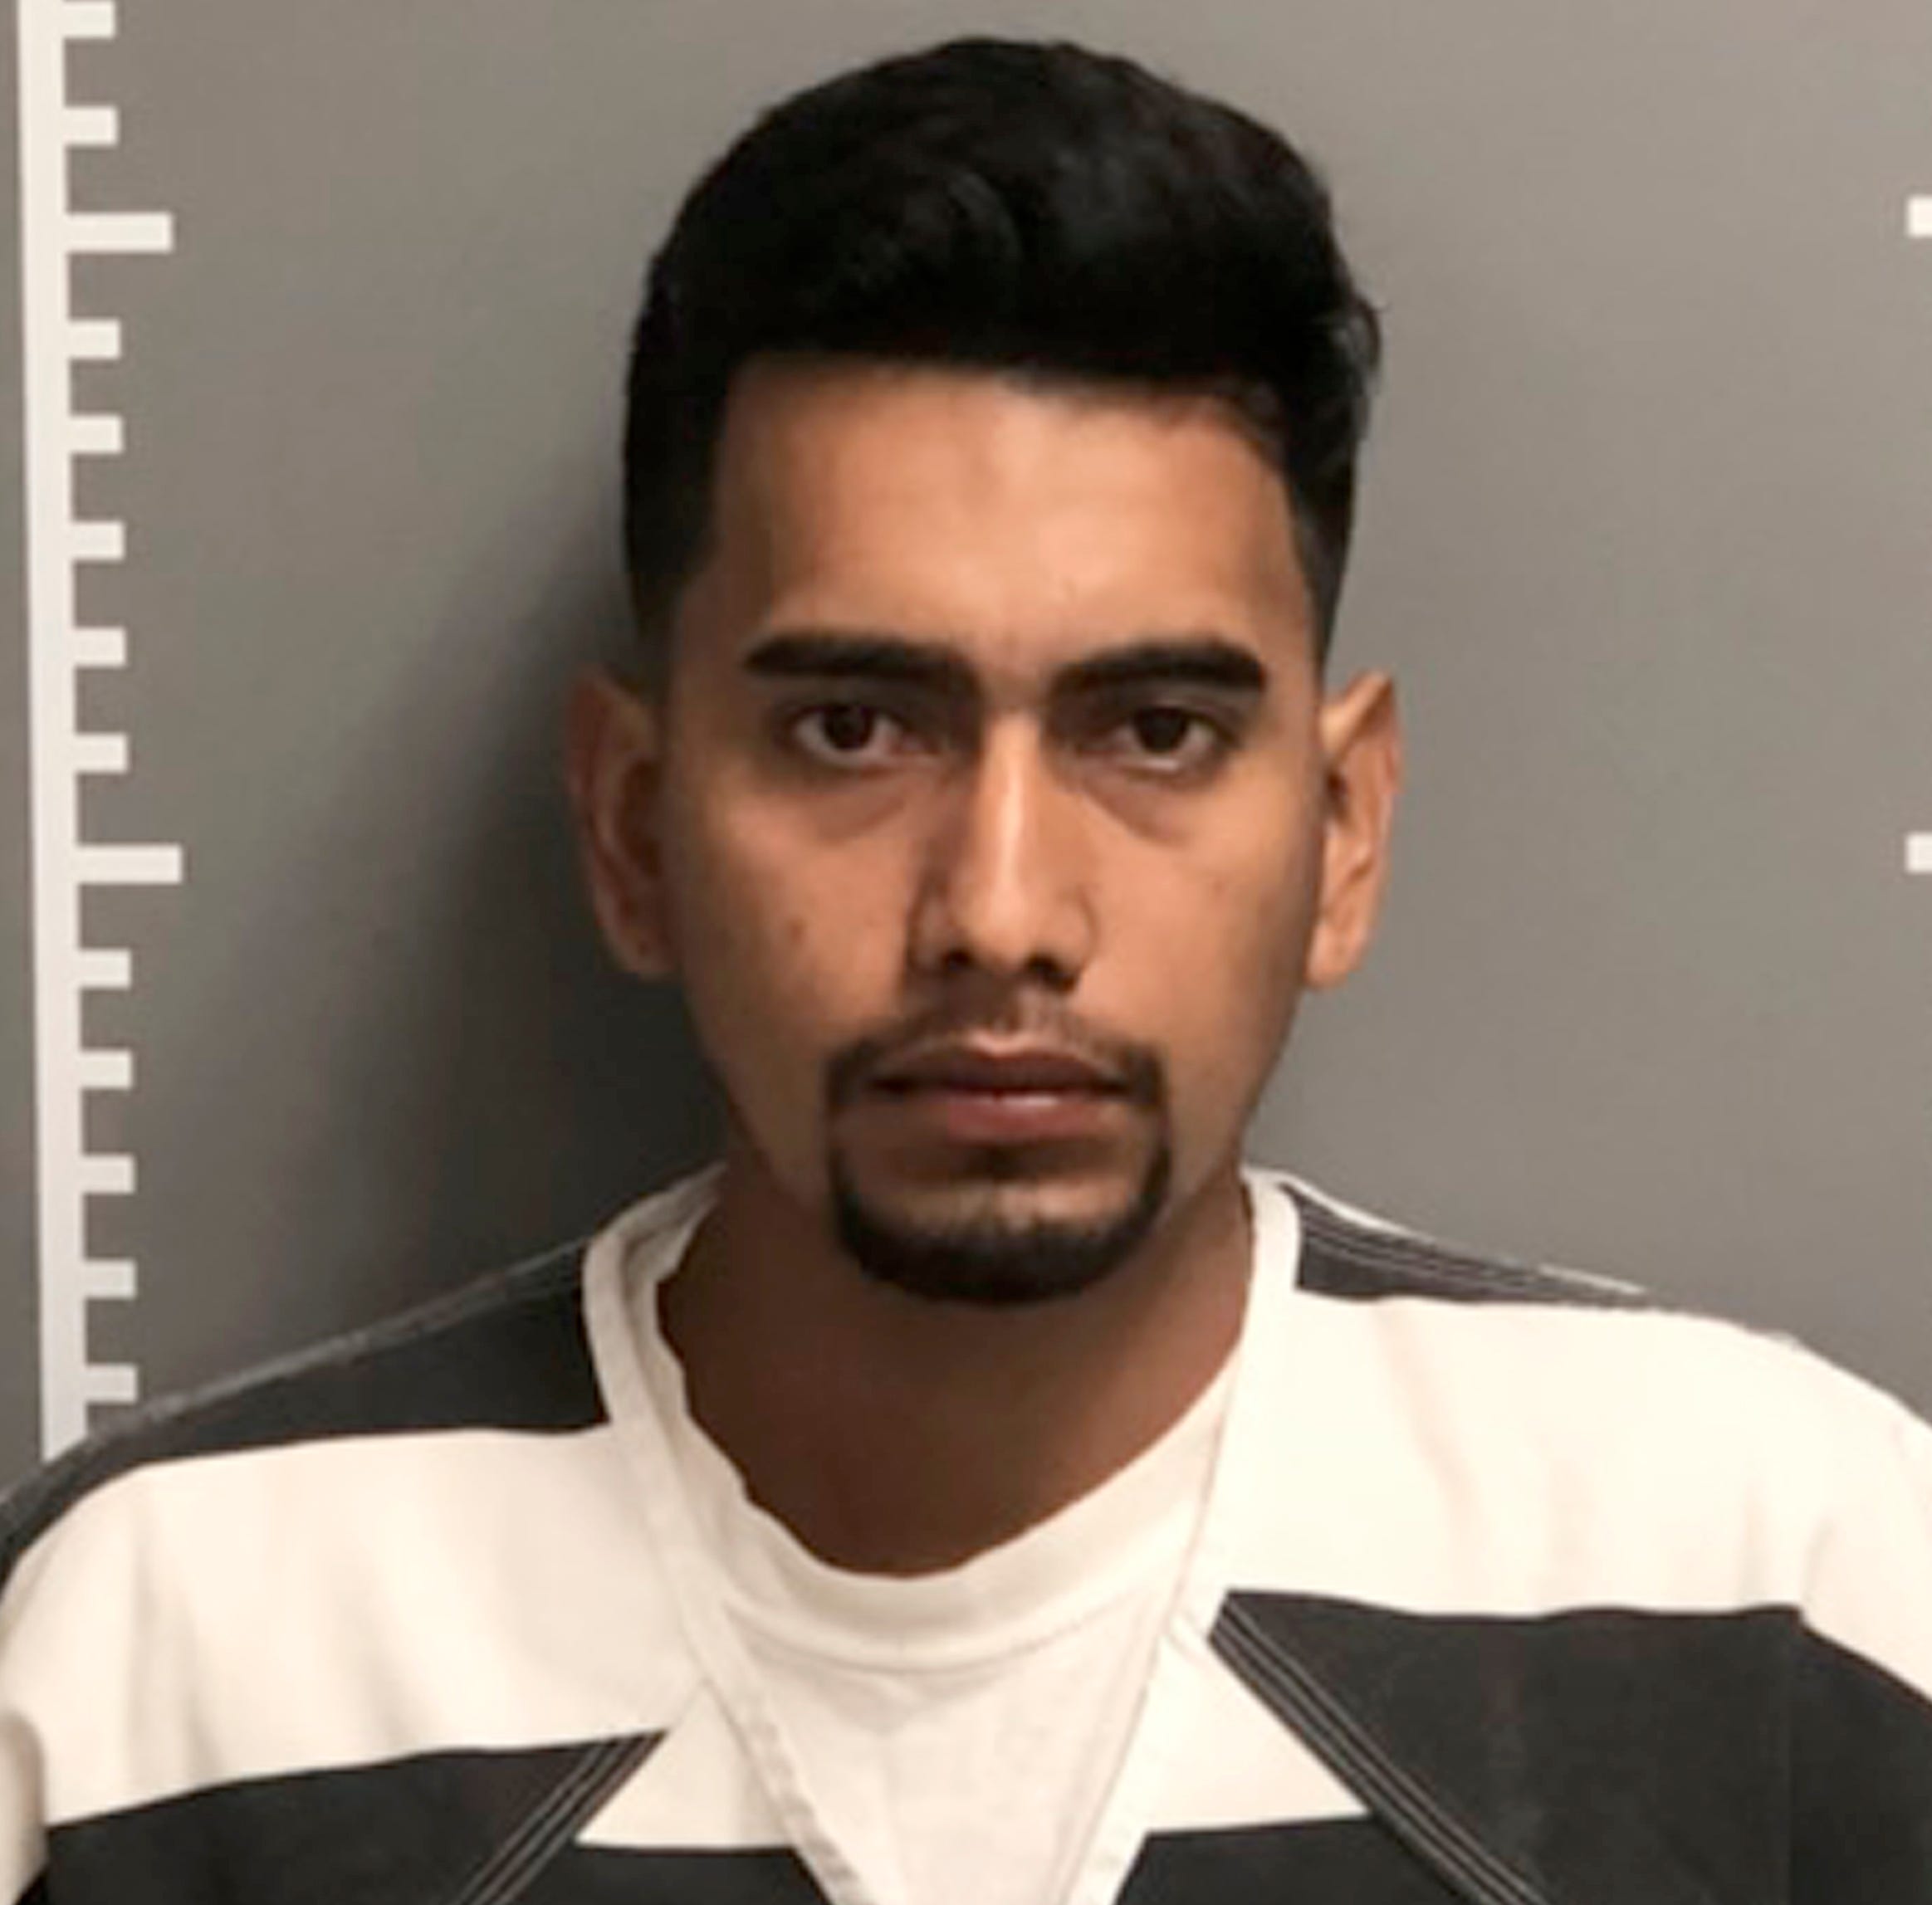 This undated photo provided by the Iowa Department of Public Safety shows Cristhian Bahena Rivera. Authorities said on Tuesday, Aug. 21, 2018, that they have charged a man living in the U.S. illegally with murder in the death of Iowa college student,